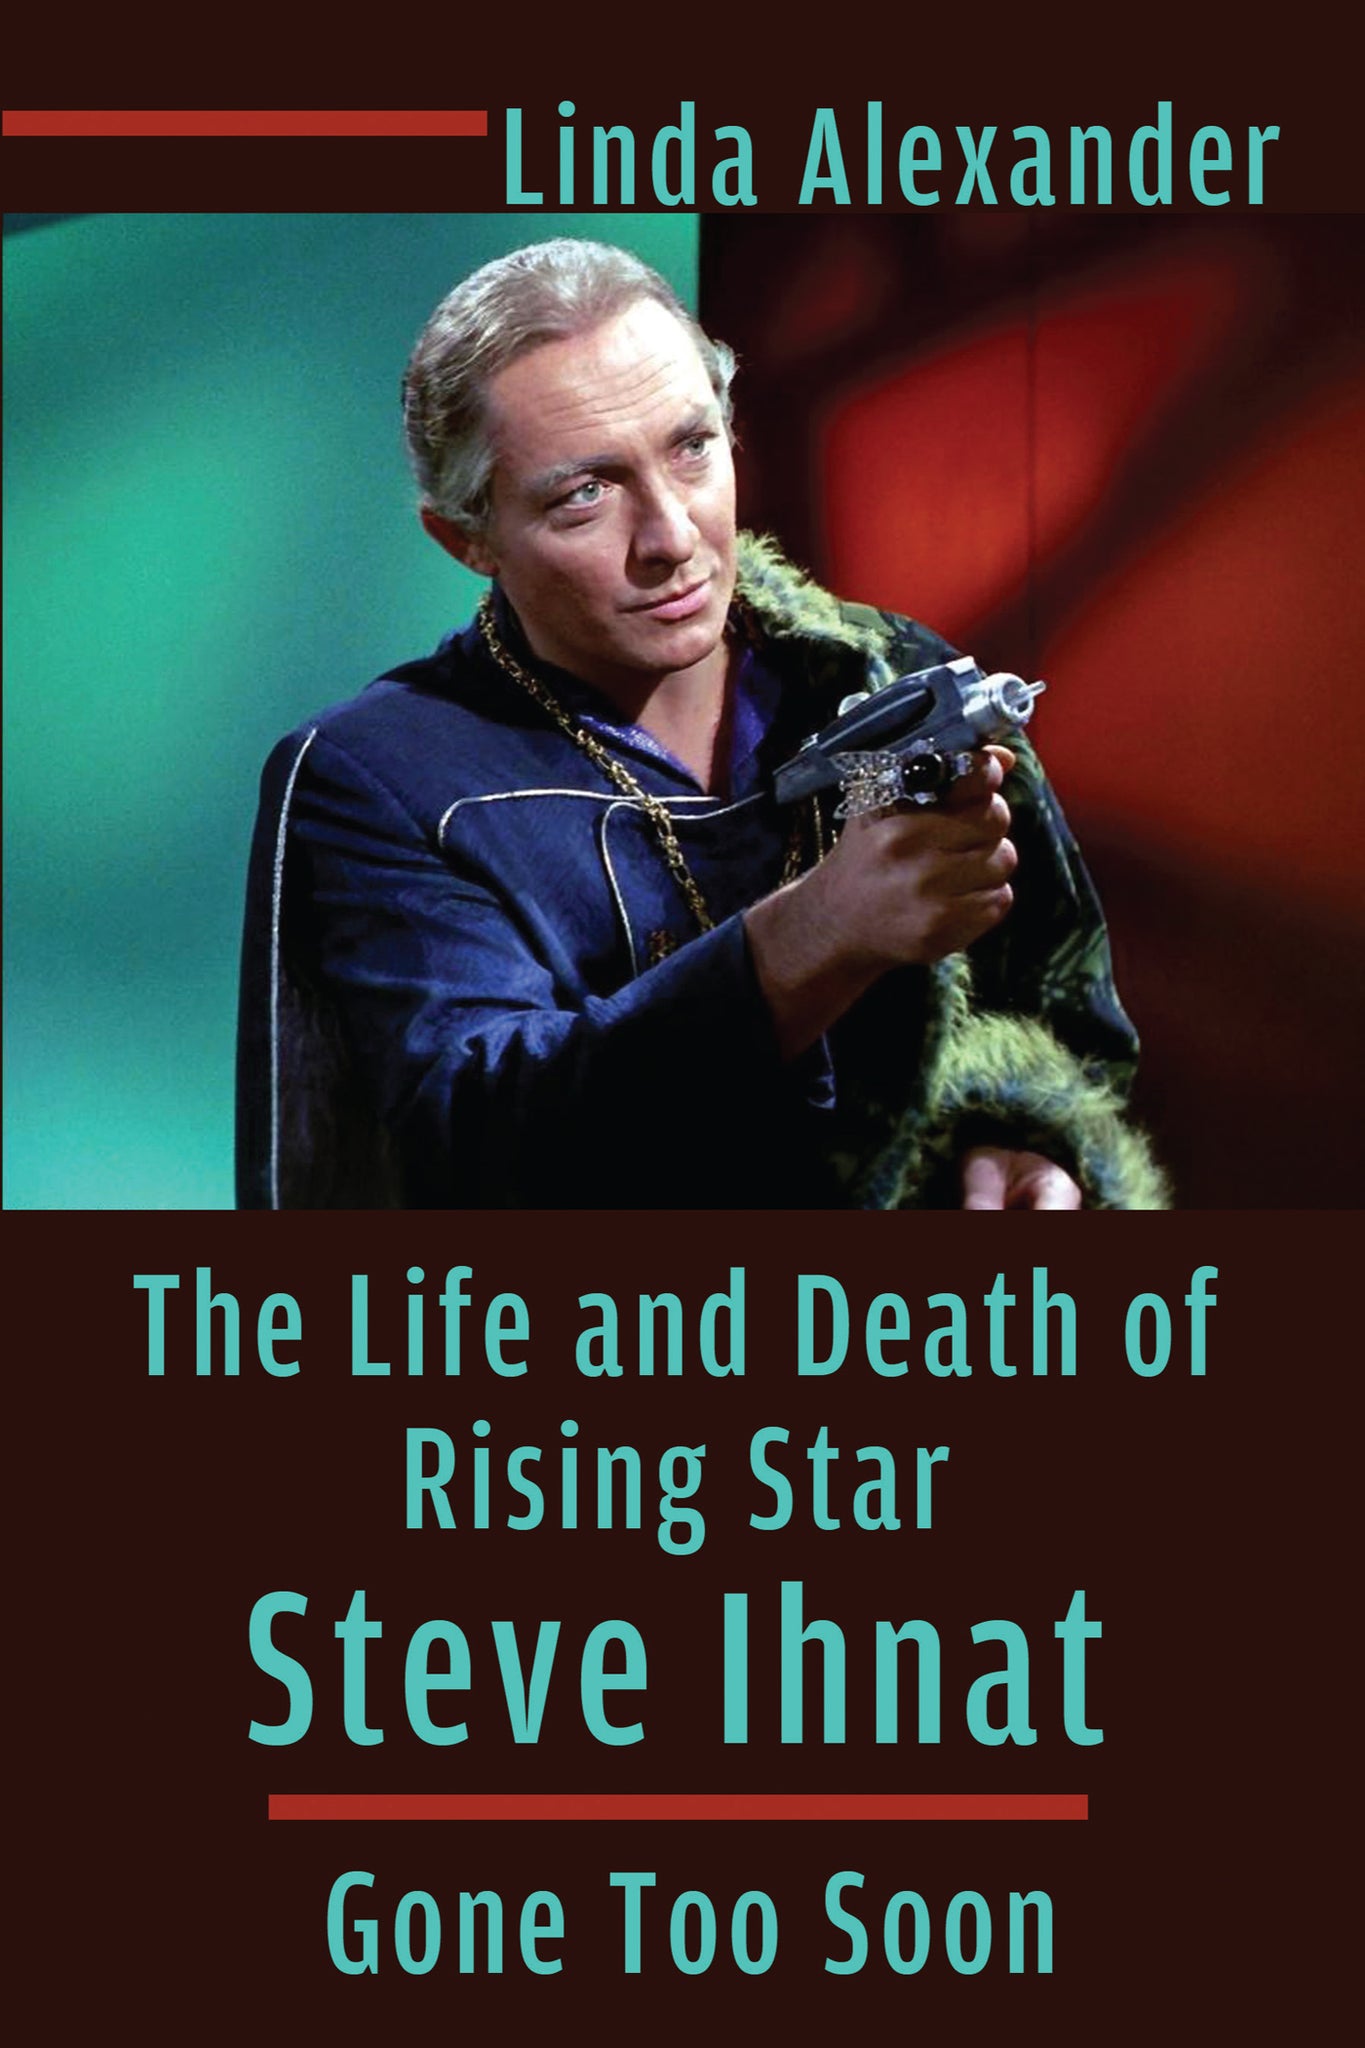 The Life and Death of Rising Star Steve Ihnat (ebook) - BearManor Manor